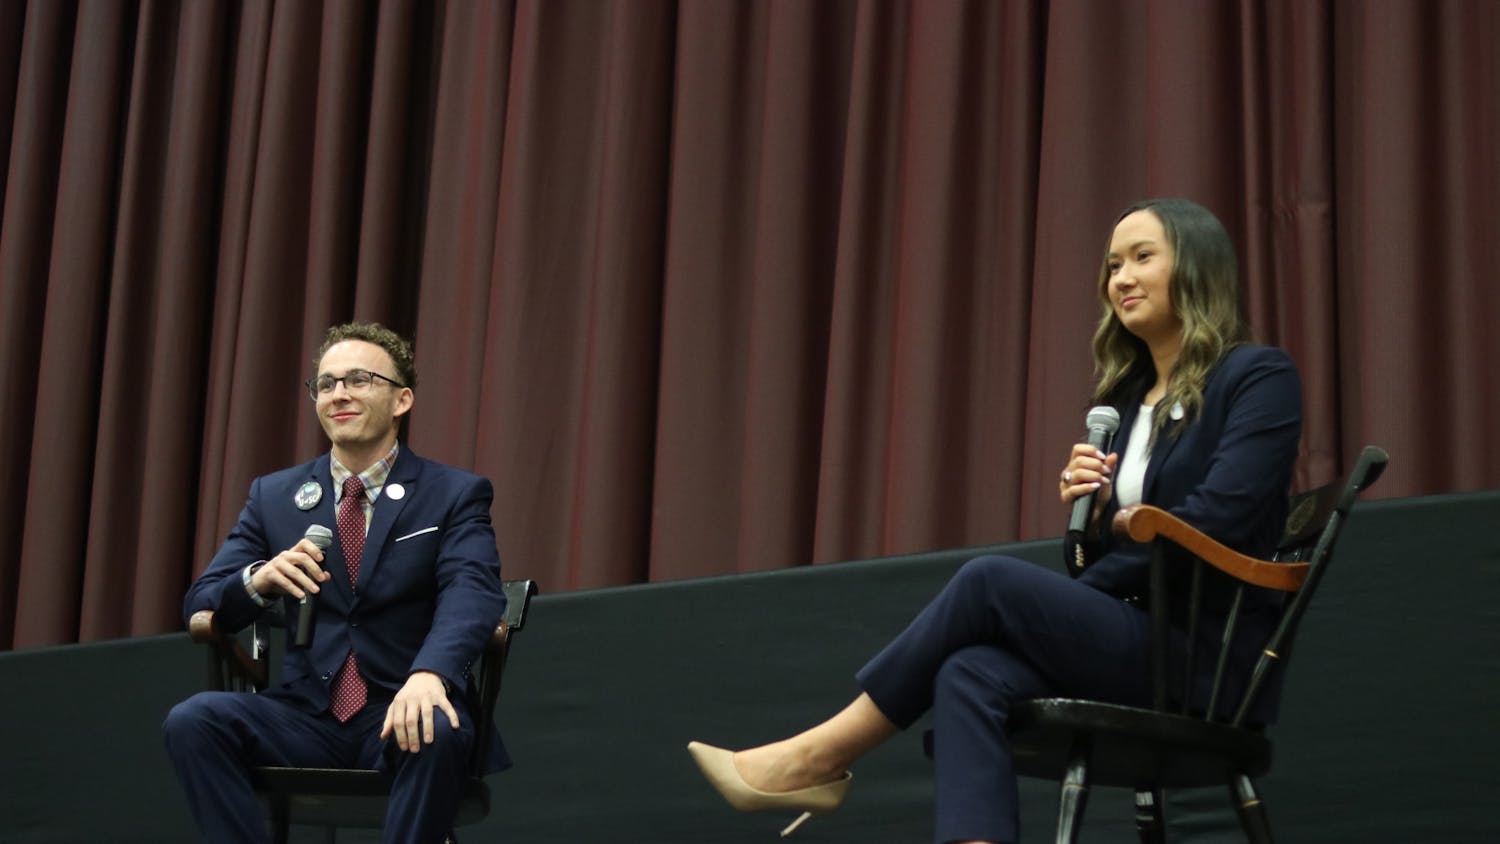 Student body presidential candidates third-year political science student Reilly Arford (left) and third-year public relations student Emily "Emmie" Thompson (right) on stage debating on Feb. 15, 2023. They are the only two presidential candidates this election season.&nbsp;